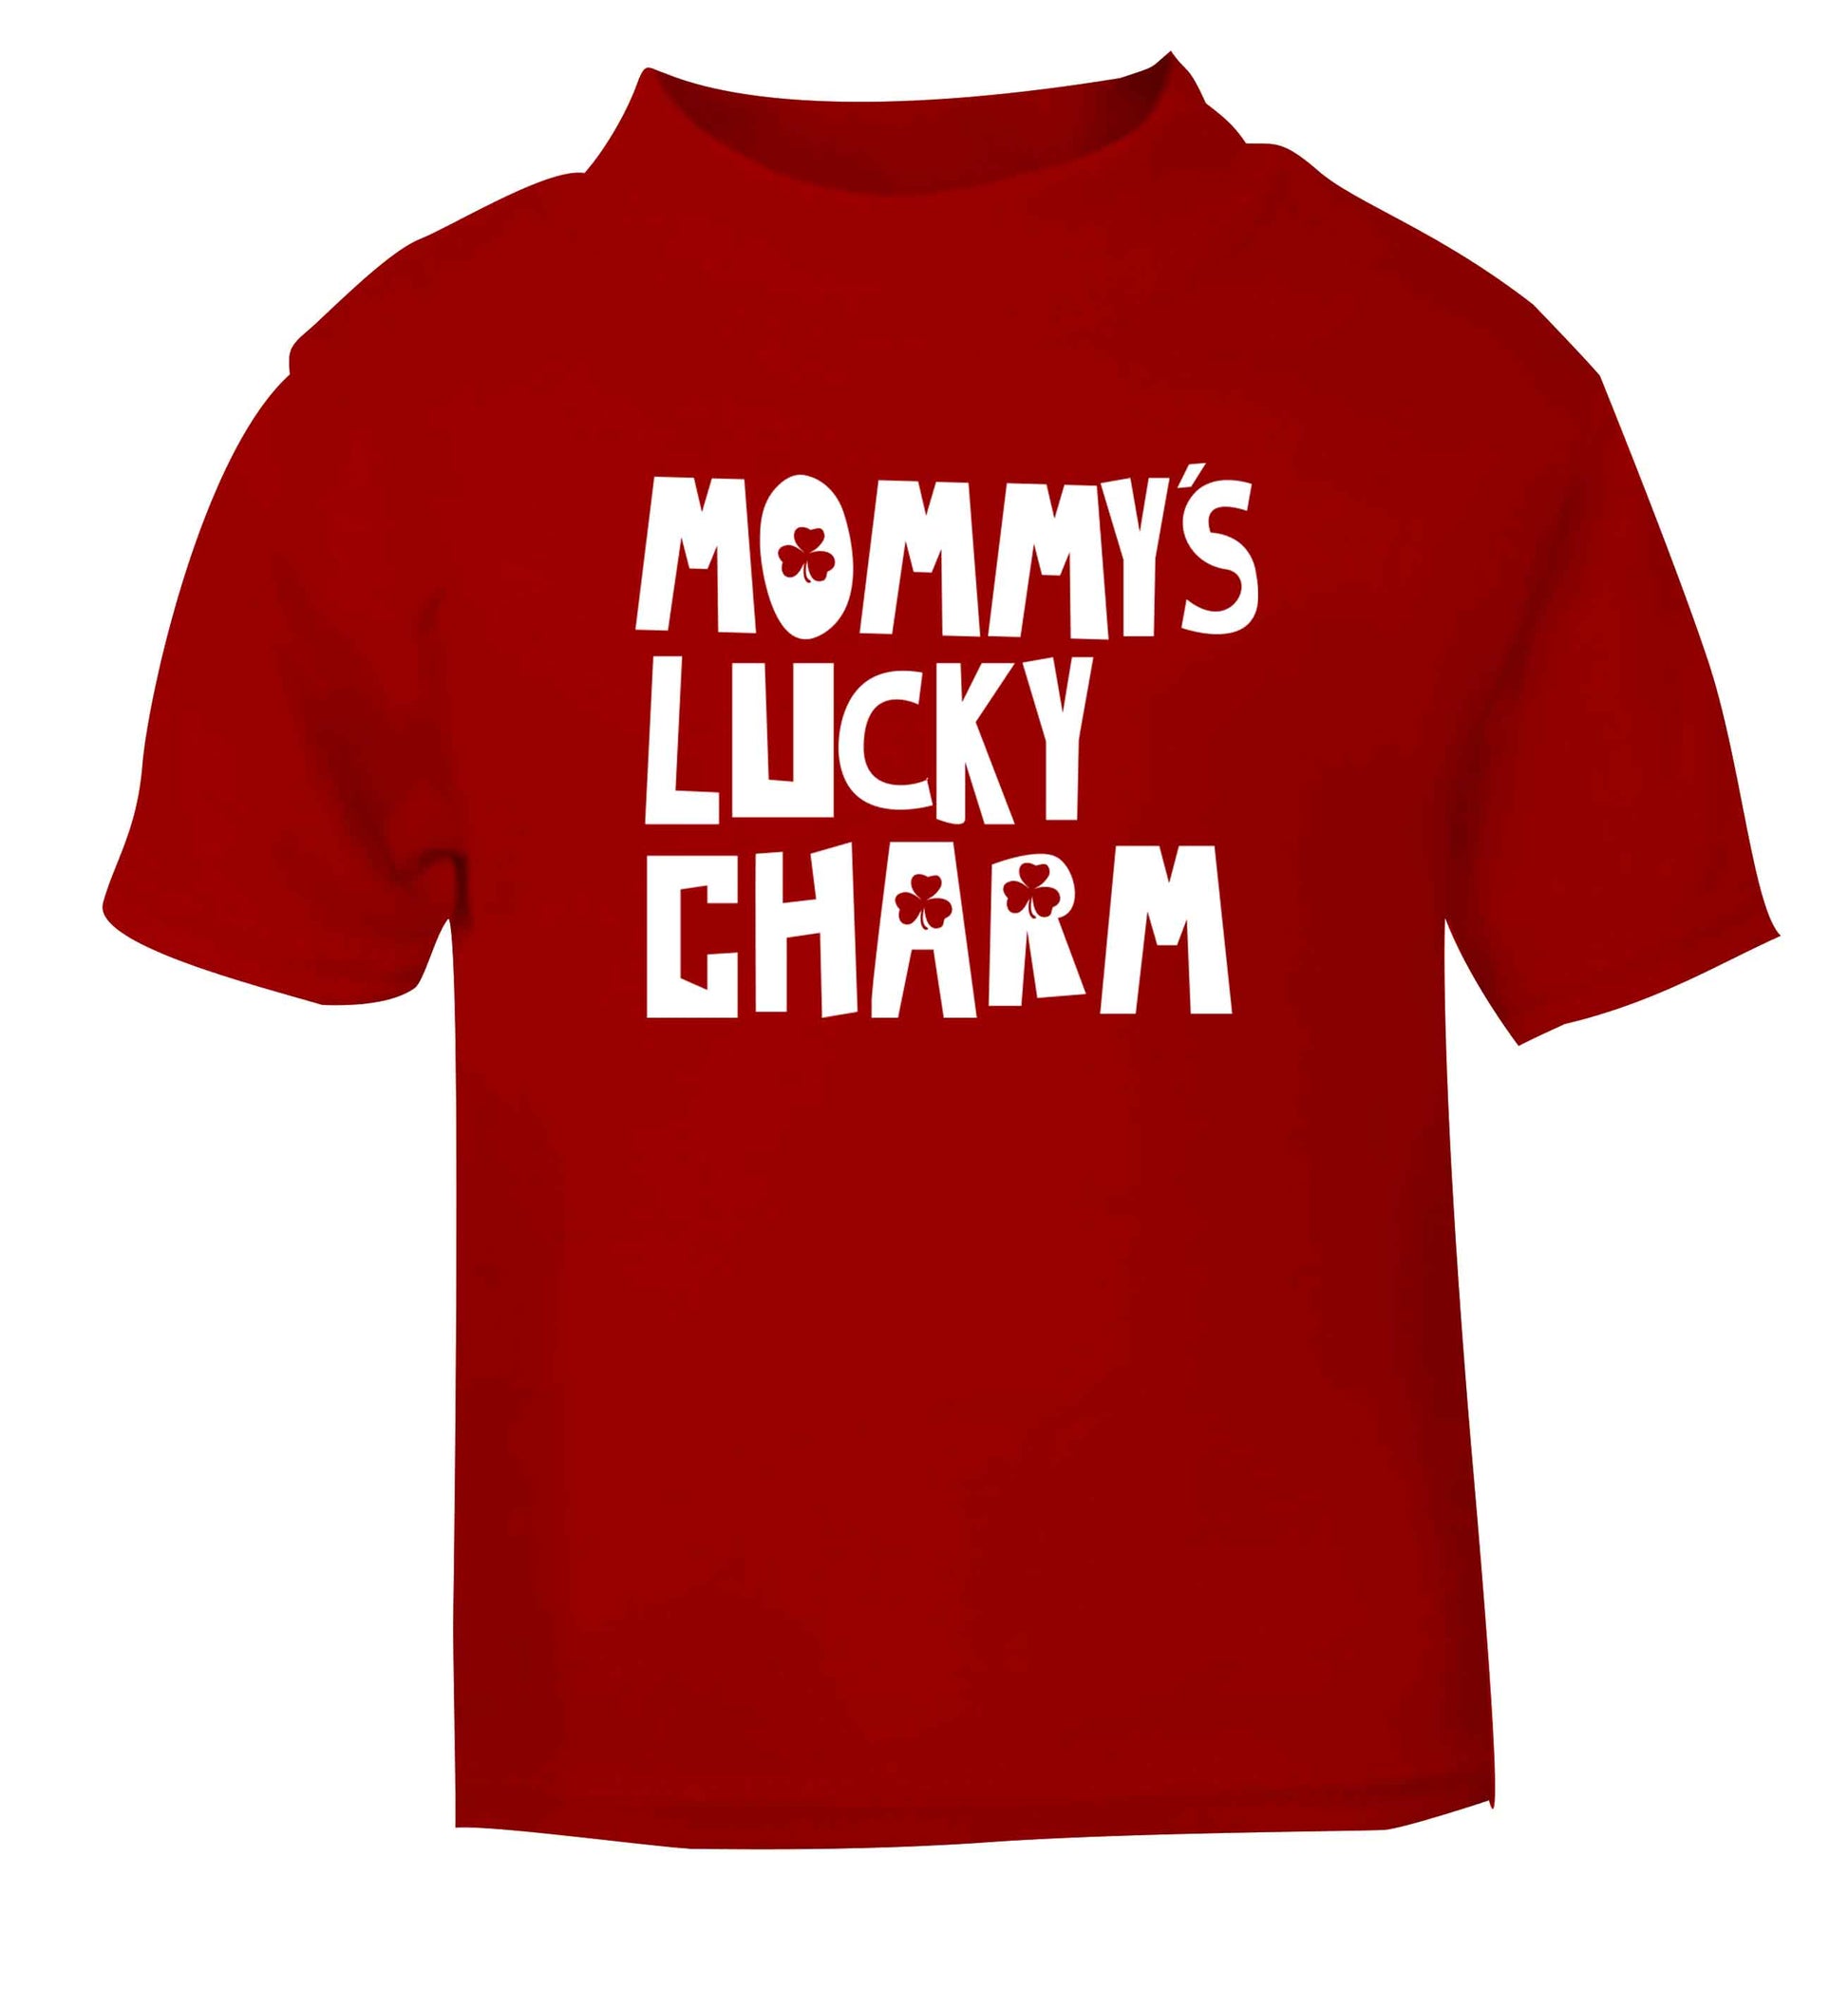 Mommy's lucky charm red baby toddler Tshirt 2 Years